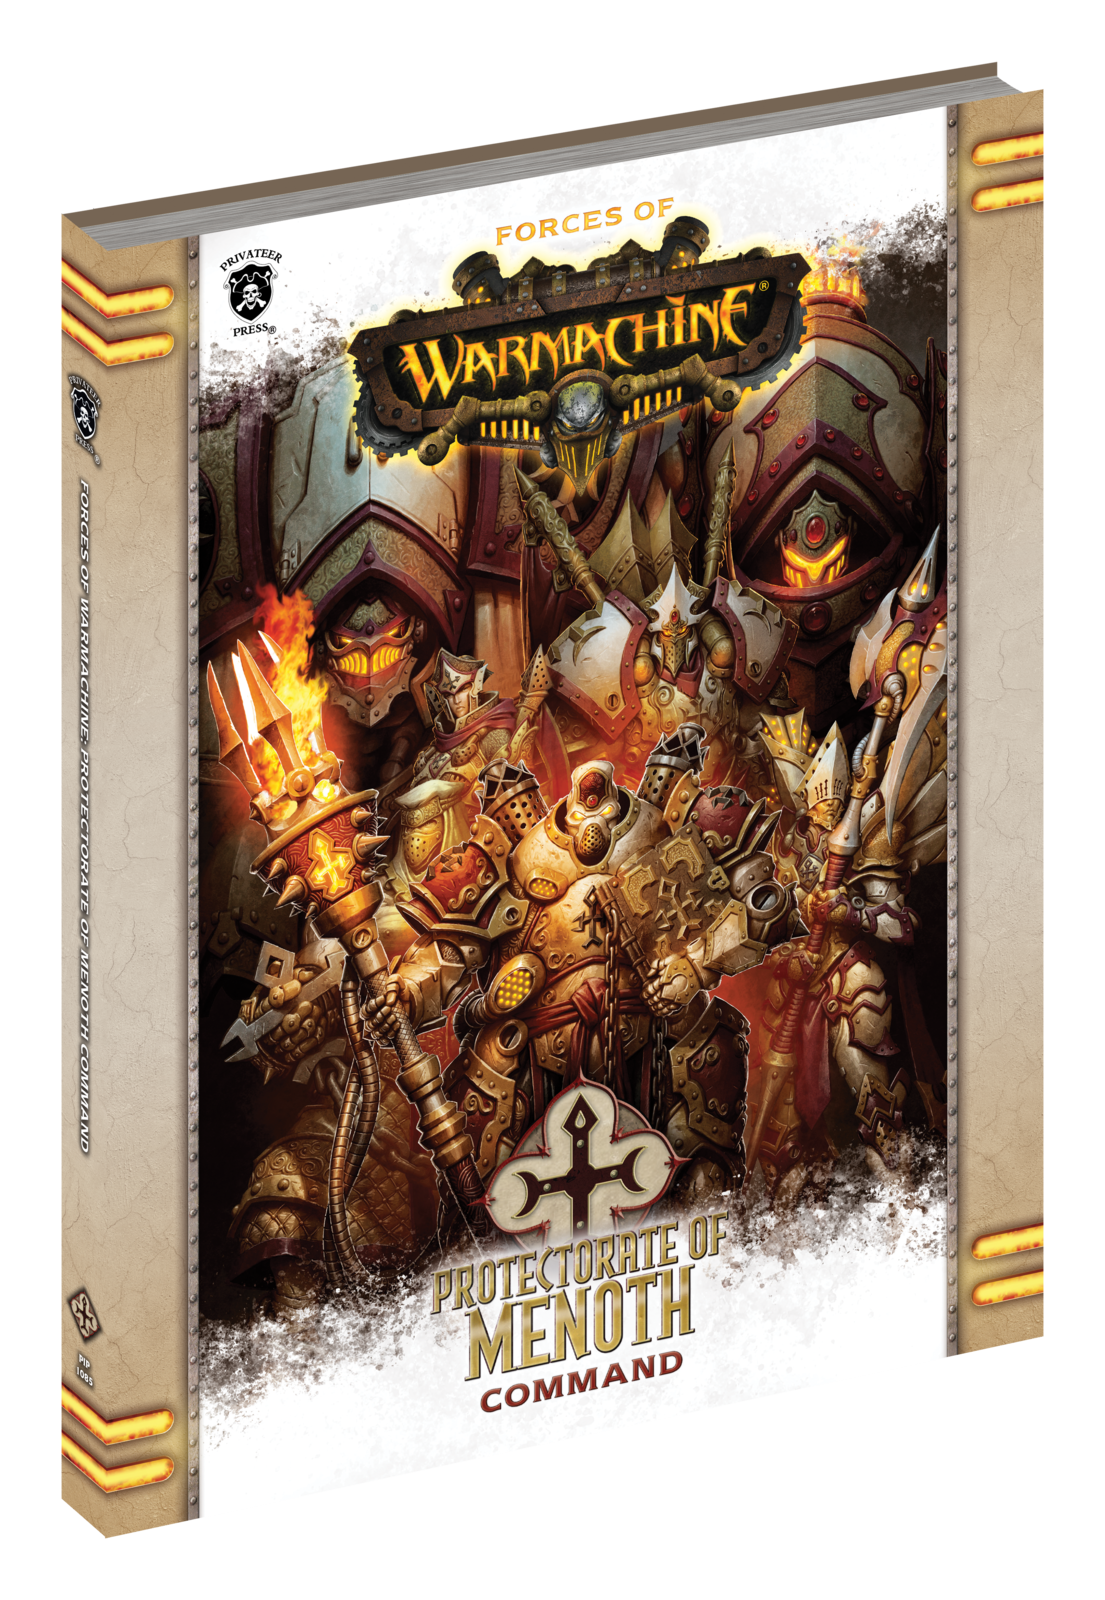 Forces of Protectorate of Menoth - Softcover